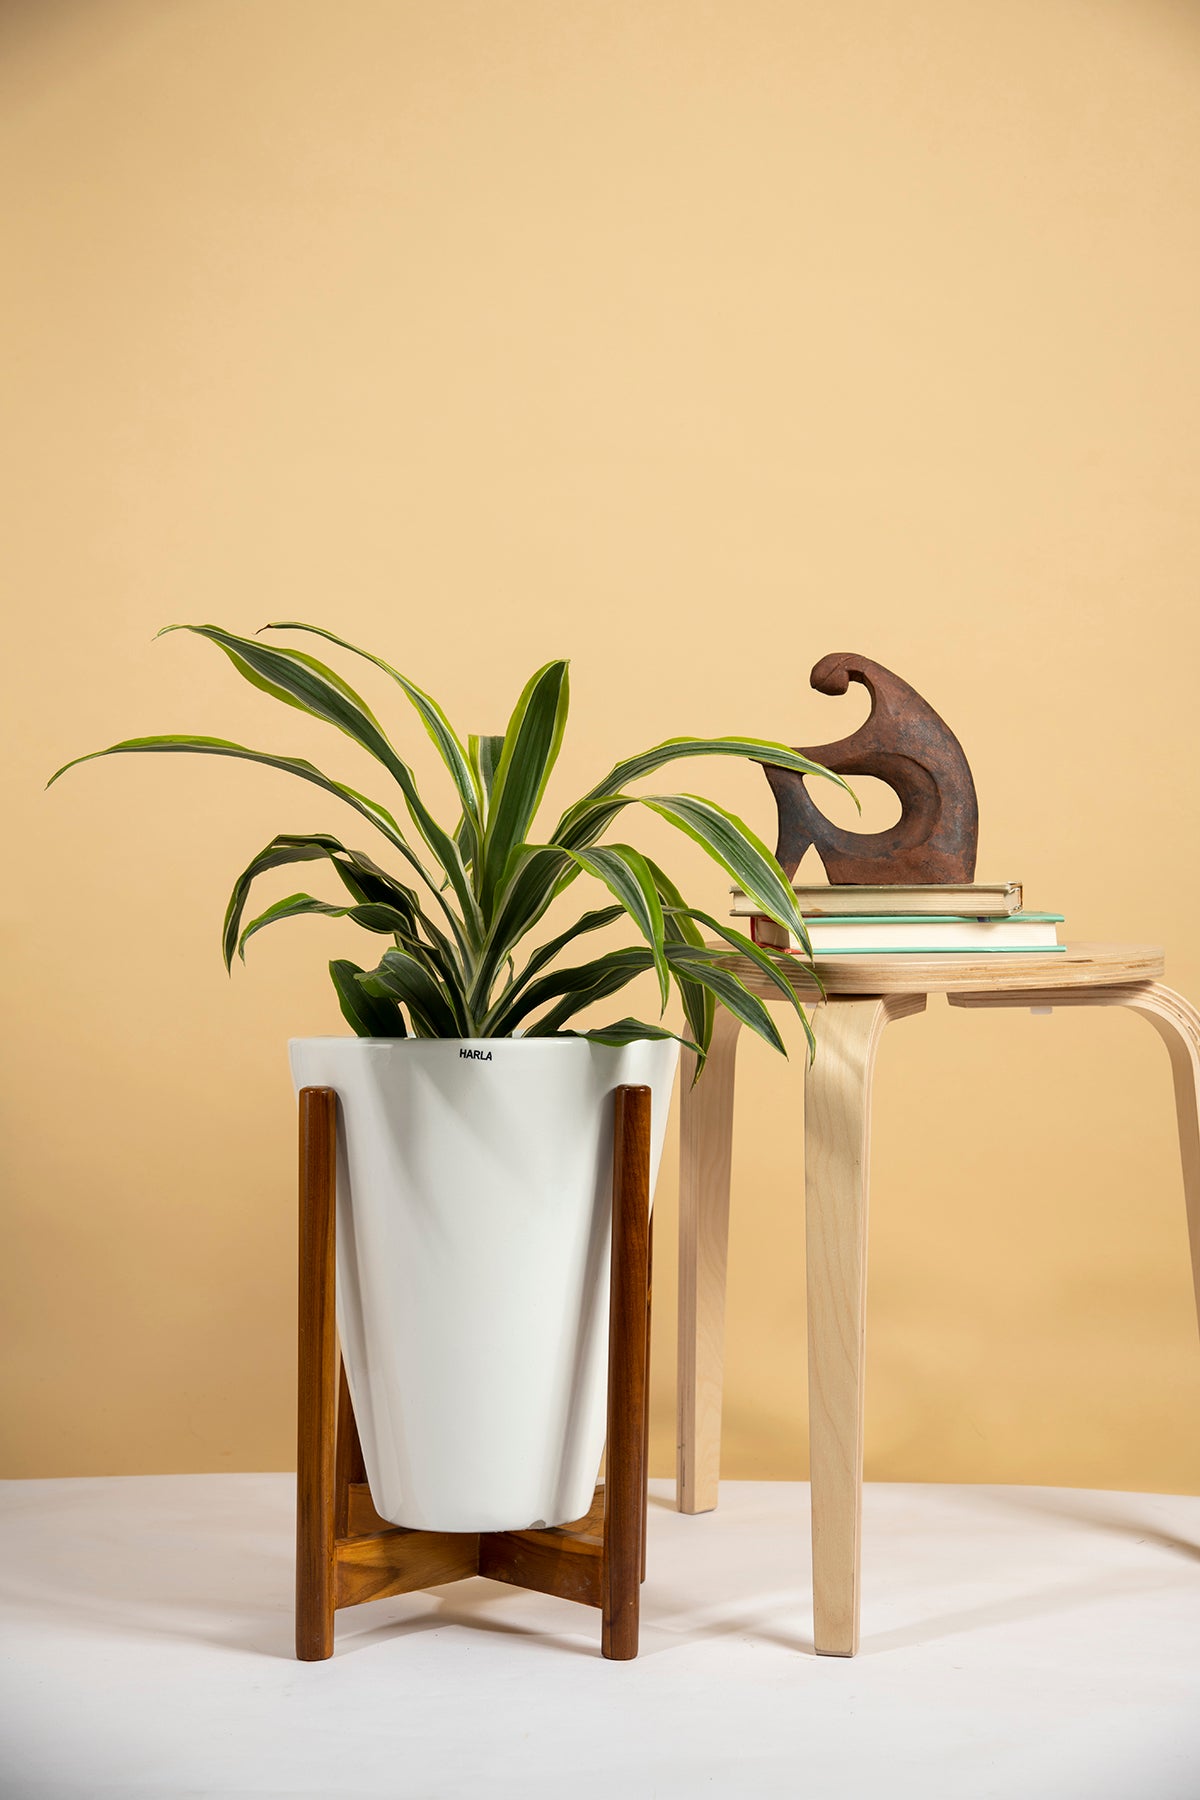 Large Size Love Bite ceramic planter with wooden stand in white color with spider plant in it.